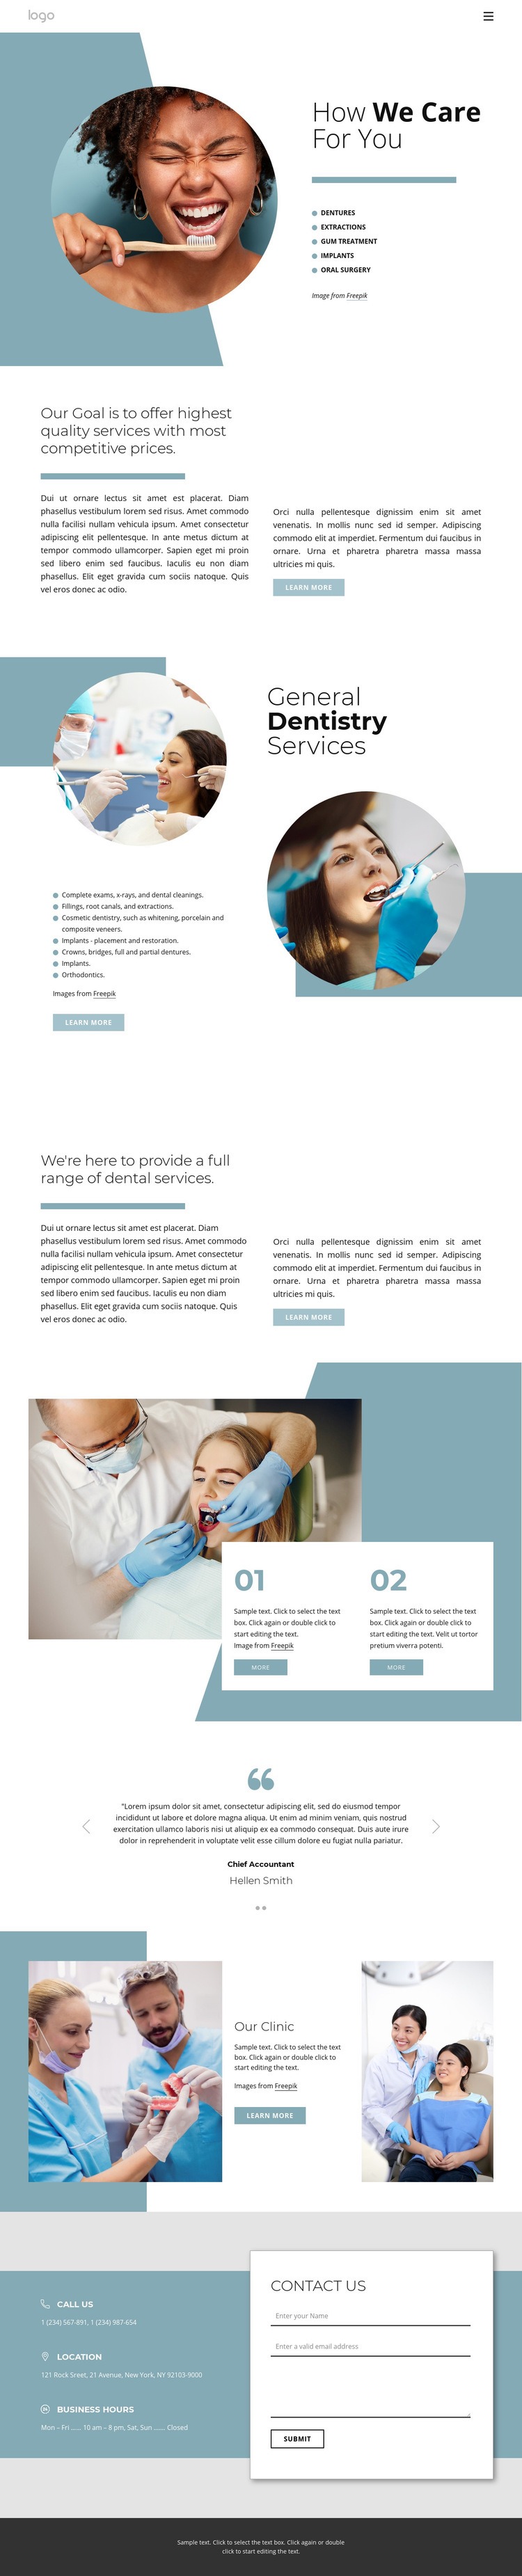 Hight quality dental services Web Page Design